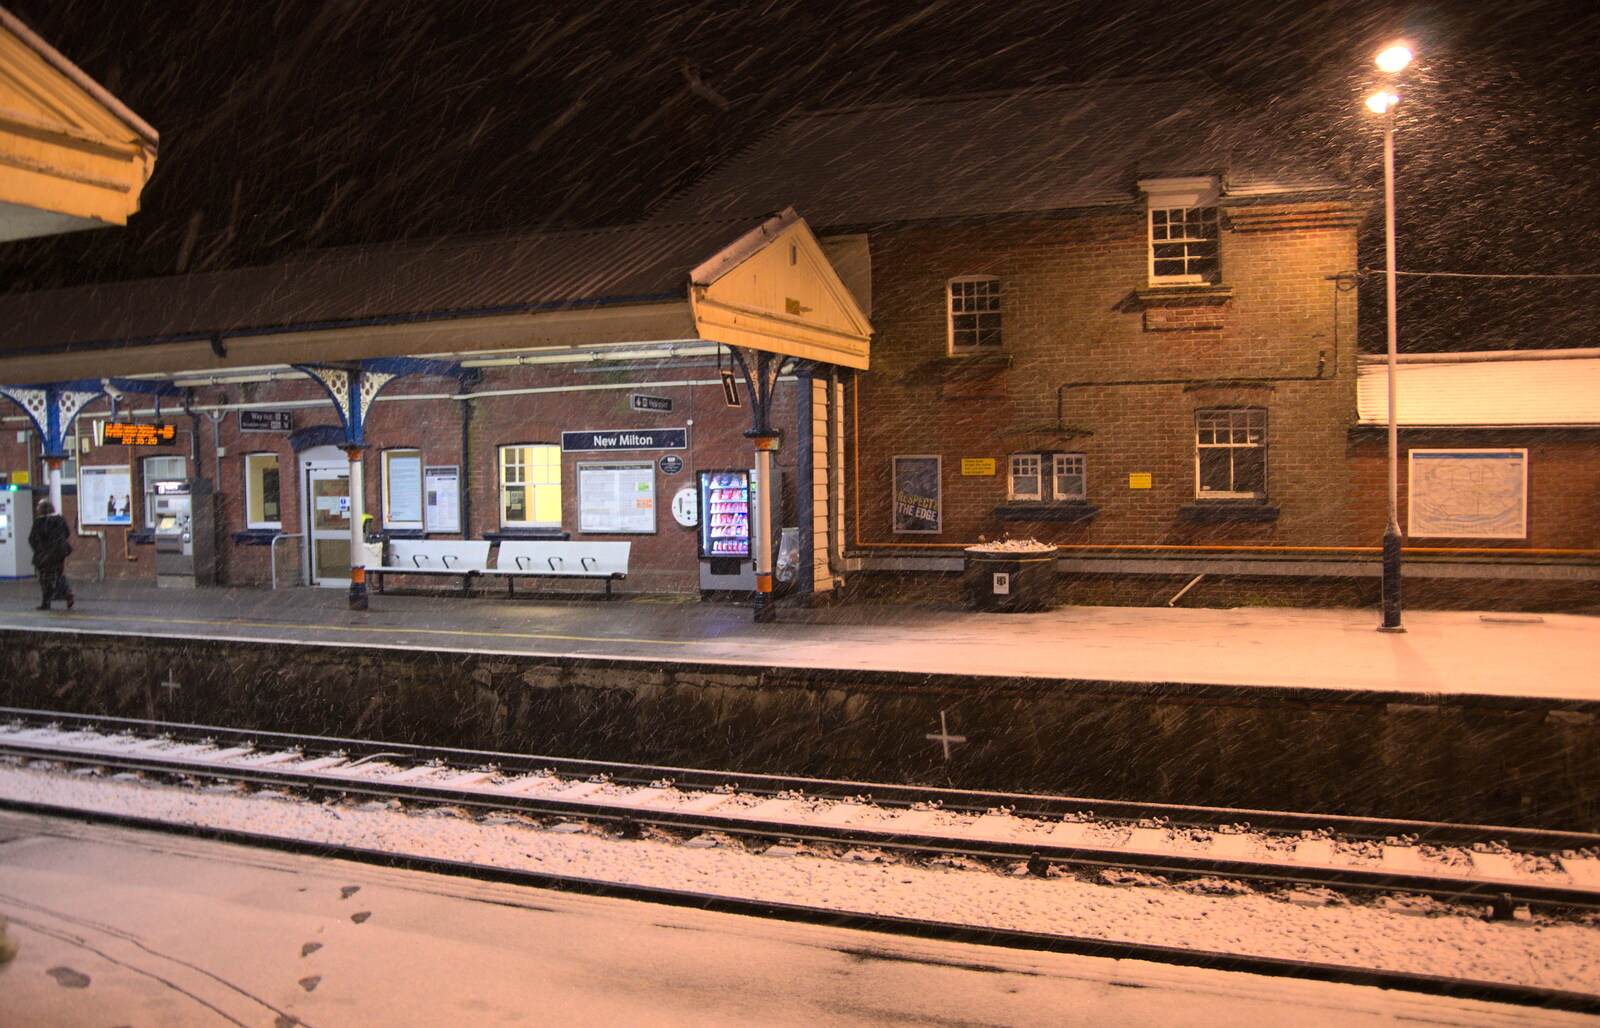 The station has not changed much since the 1980s from A Wintry Trip Down South, Walkford, Dorset - 1st February 2019